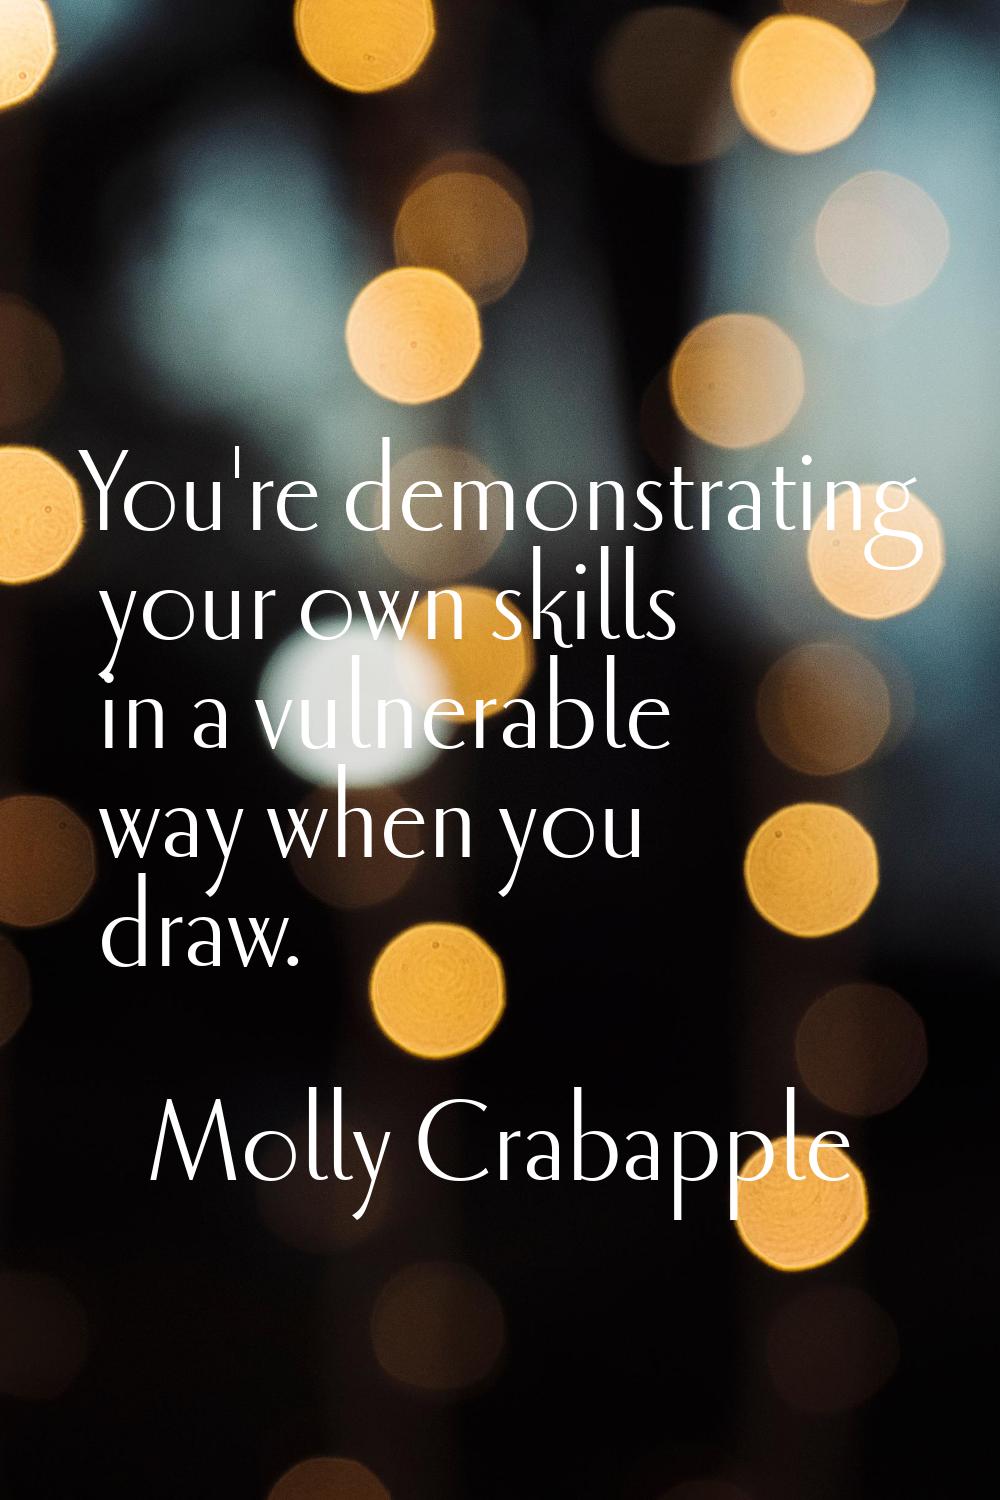 You're demonstrating your own skills in a vulnerable way when you draw.